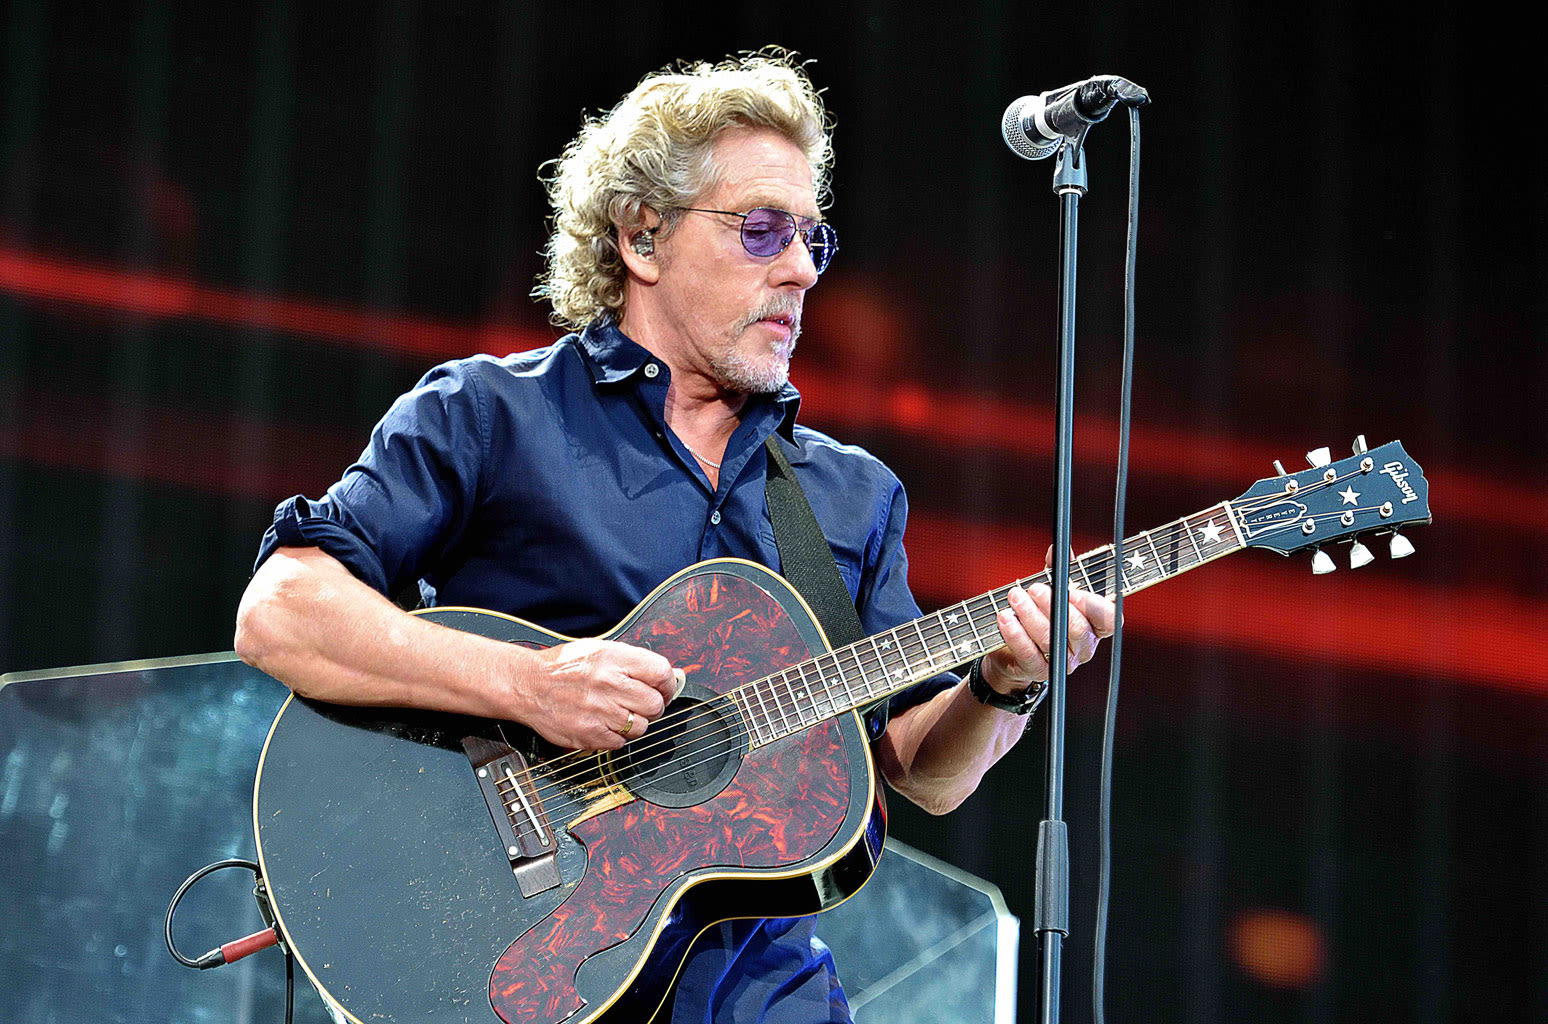 Roger Daltrey Is Done With the ‘Won’t Get Fooled Again’ Scream: ‘I’ve Had Enough of It’